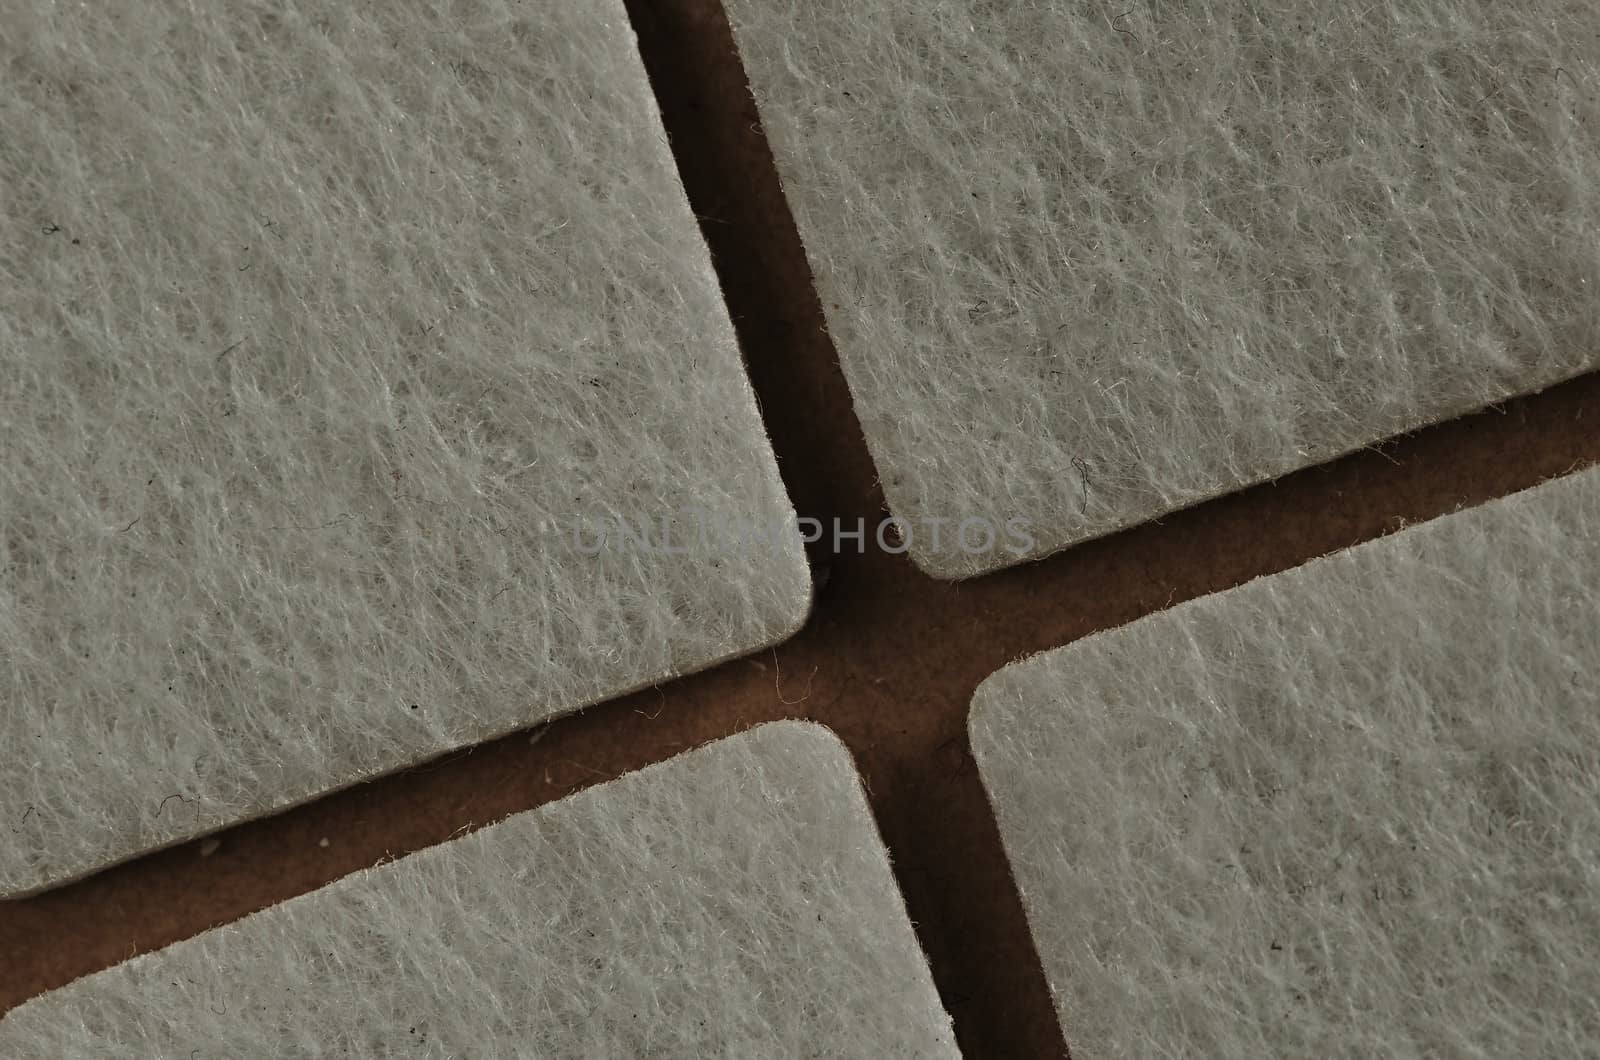 four white squares on a beige background 